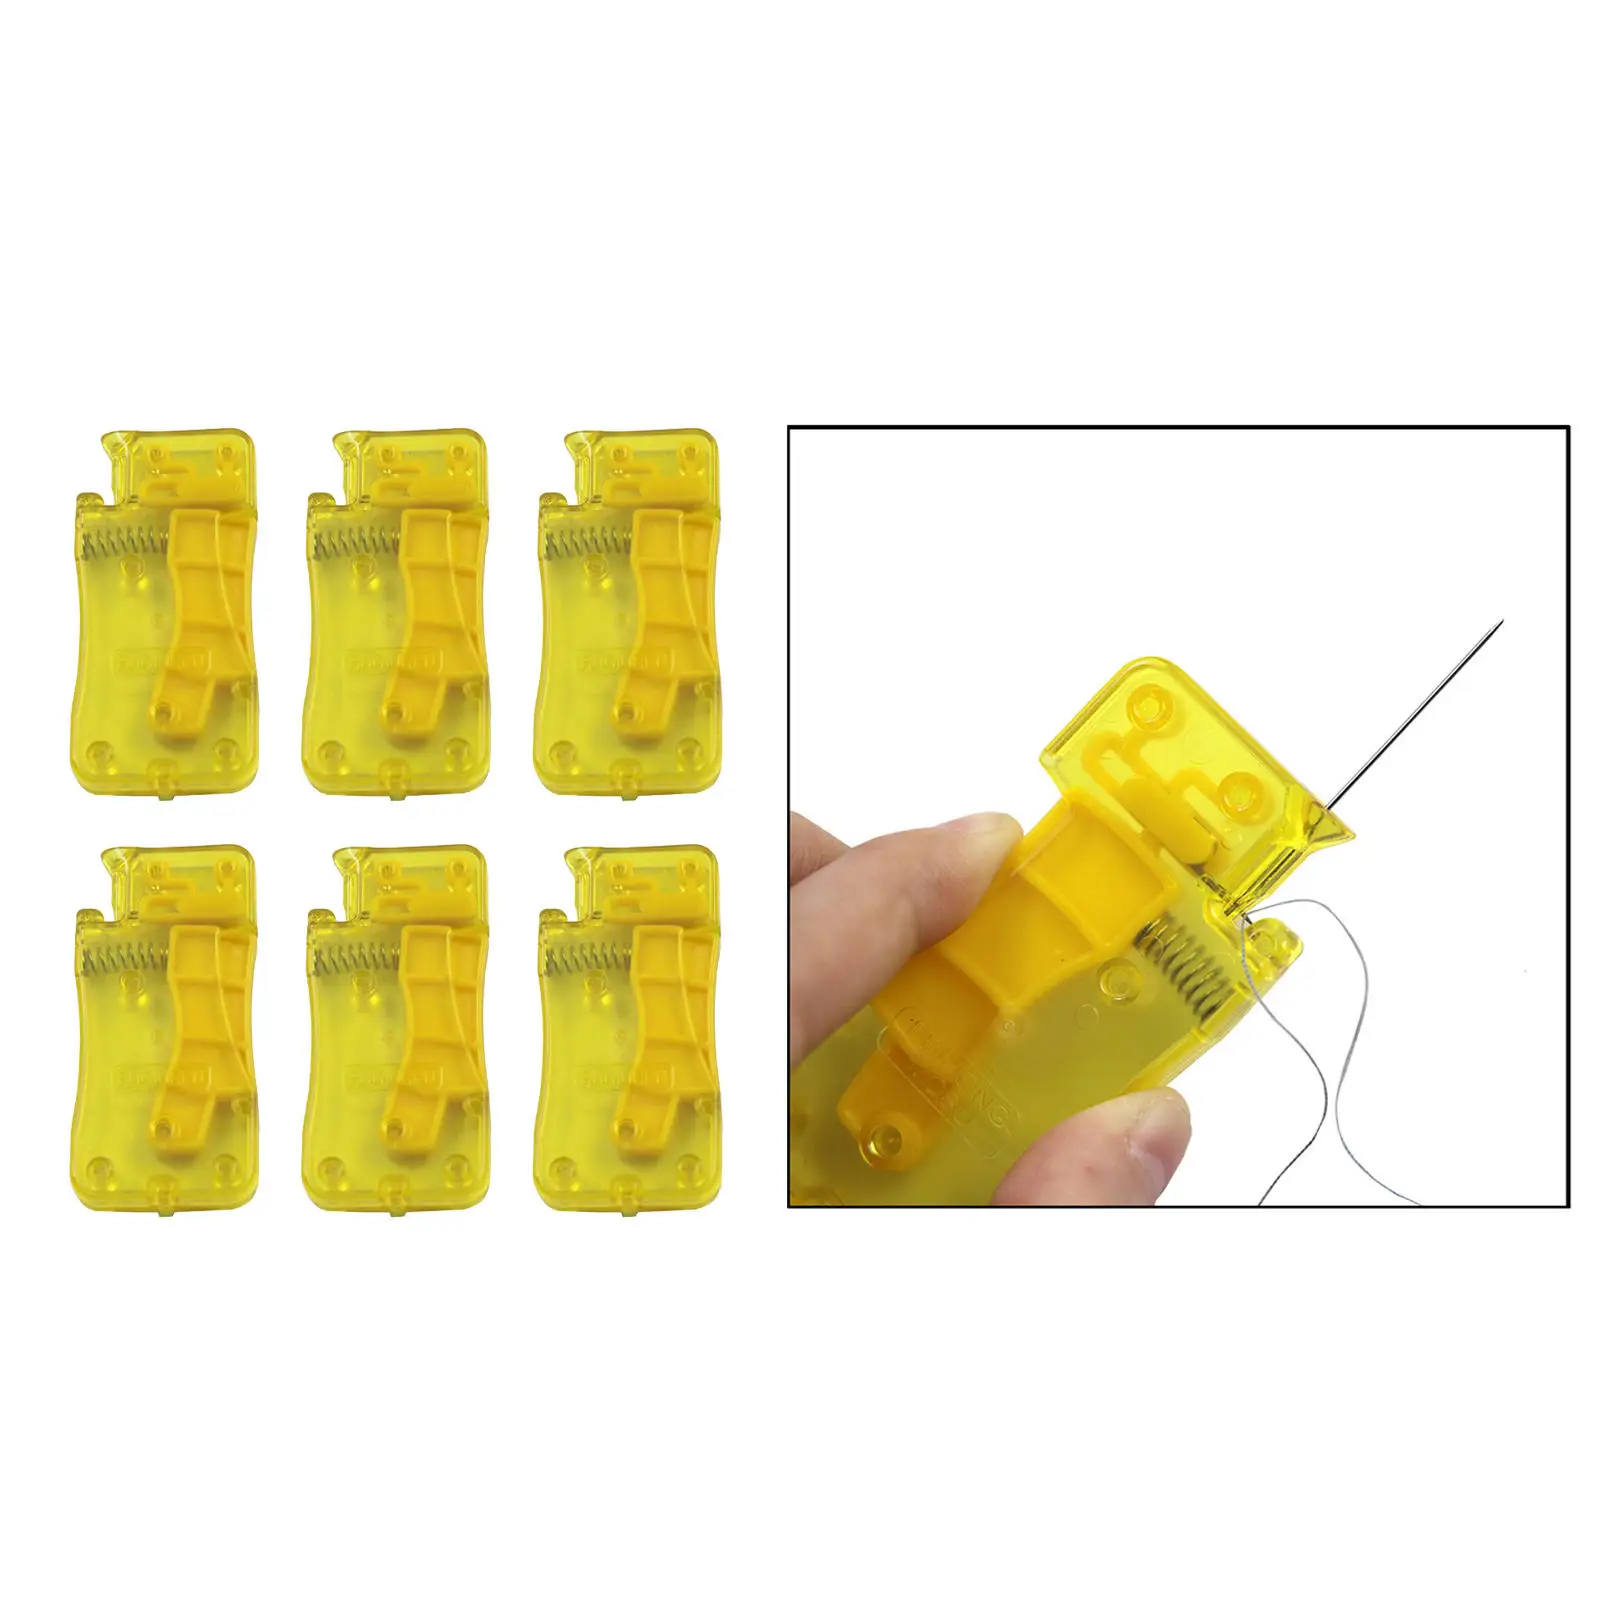 Mini 6pcs Auto Needle Threader, DIY Tool Home Hand Machine Sewing Automatic Thread Device Needle Threader Household Accessories